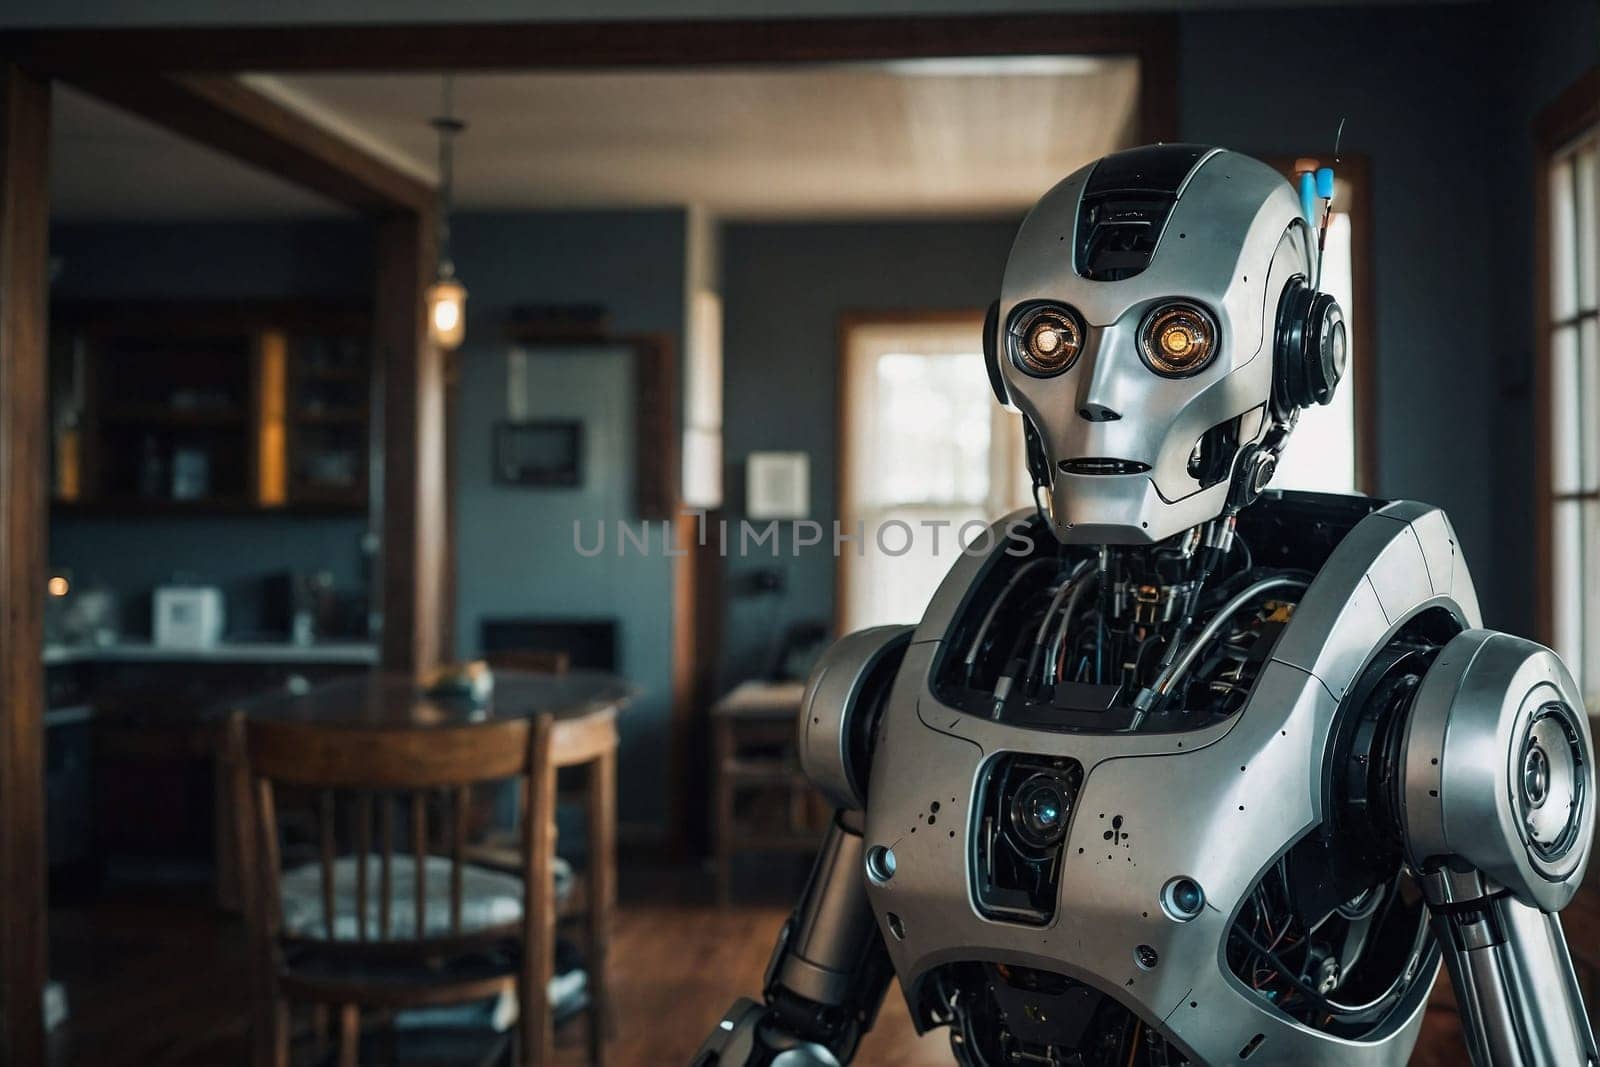 A robot stands in a modern kitchen, positioned alongside a table.